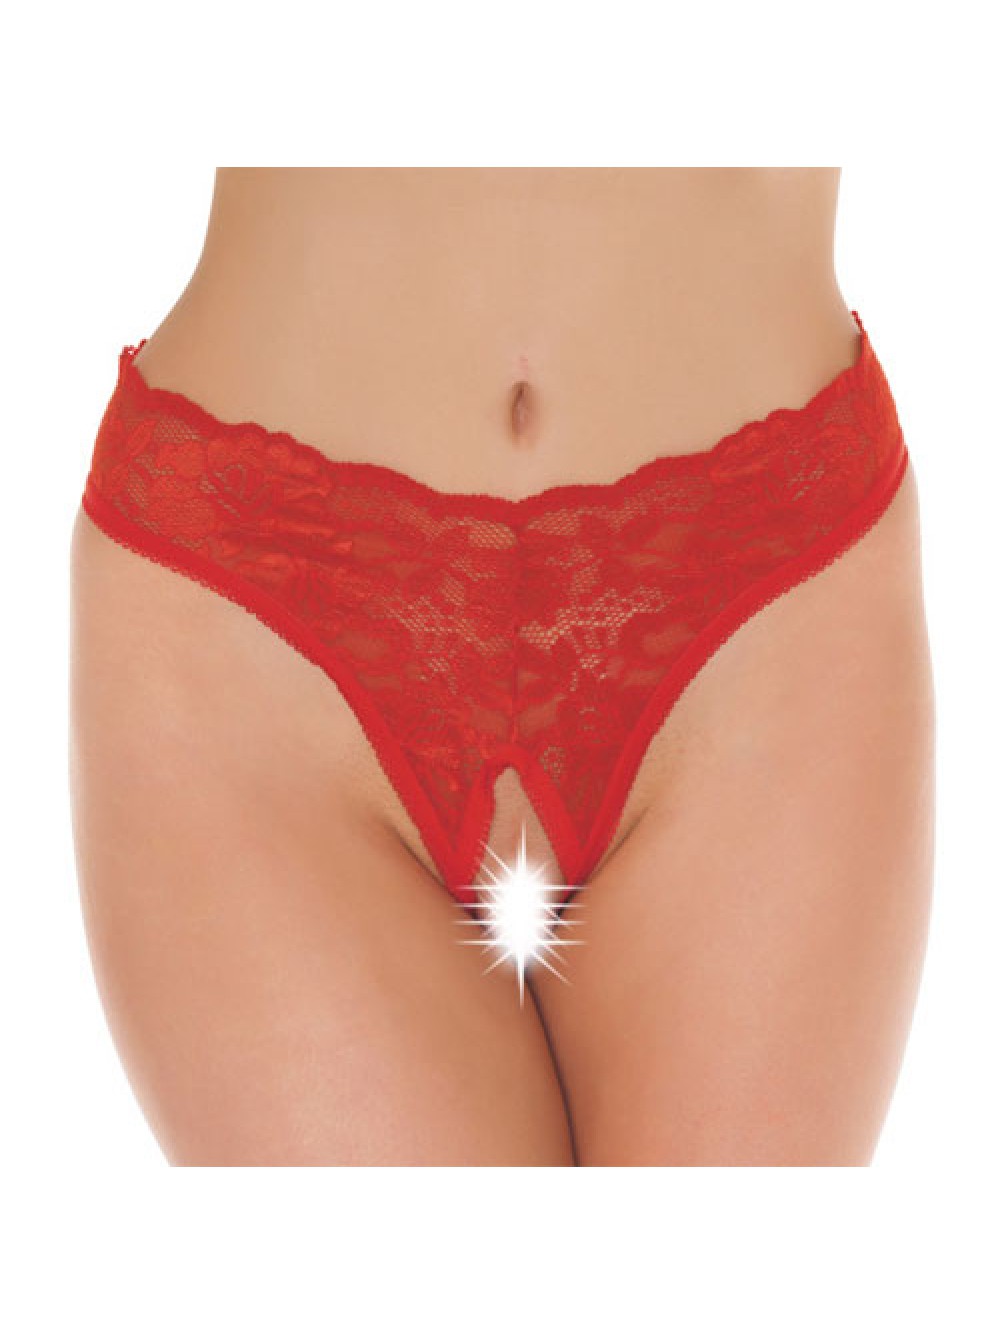 Red Lace Open Crotch G-String 8718924221044